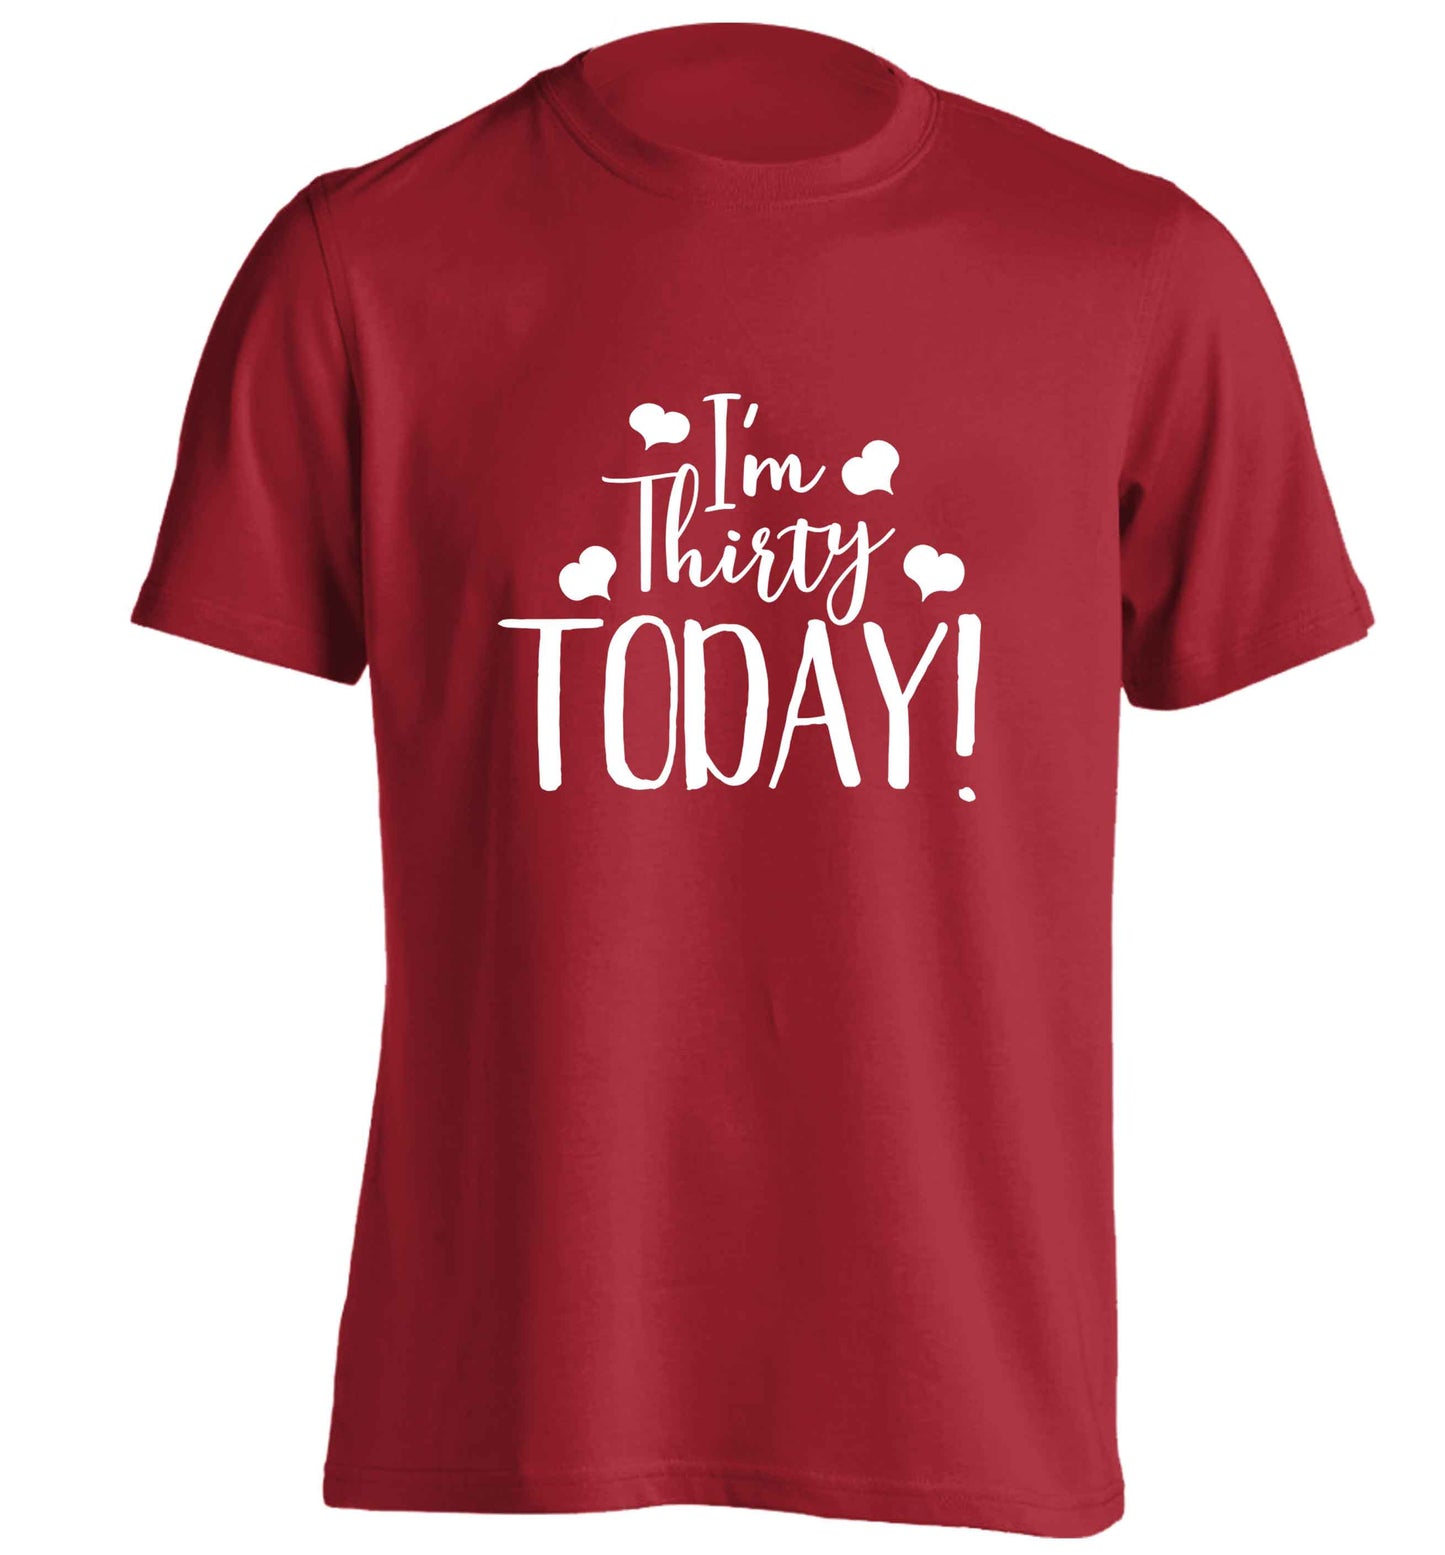 I'm thirty today! adults unisex red Tshirt 2XL